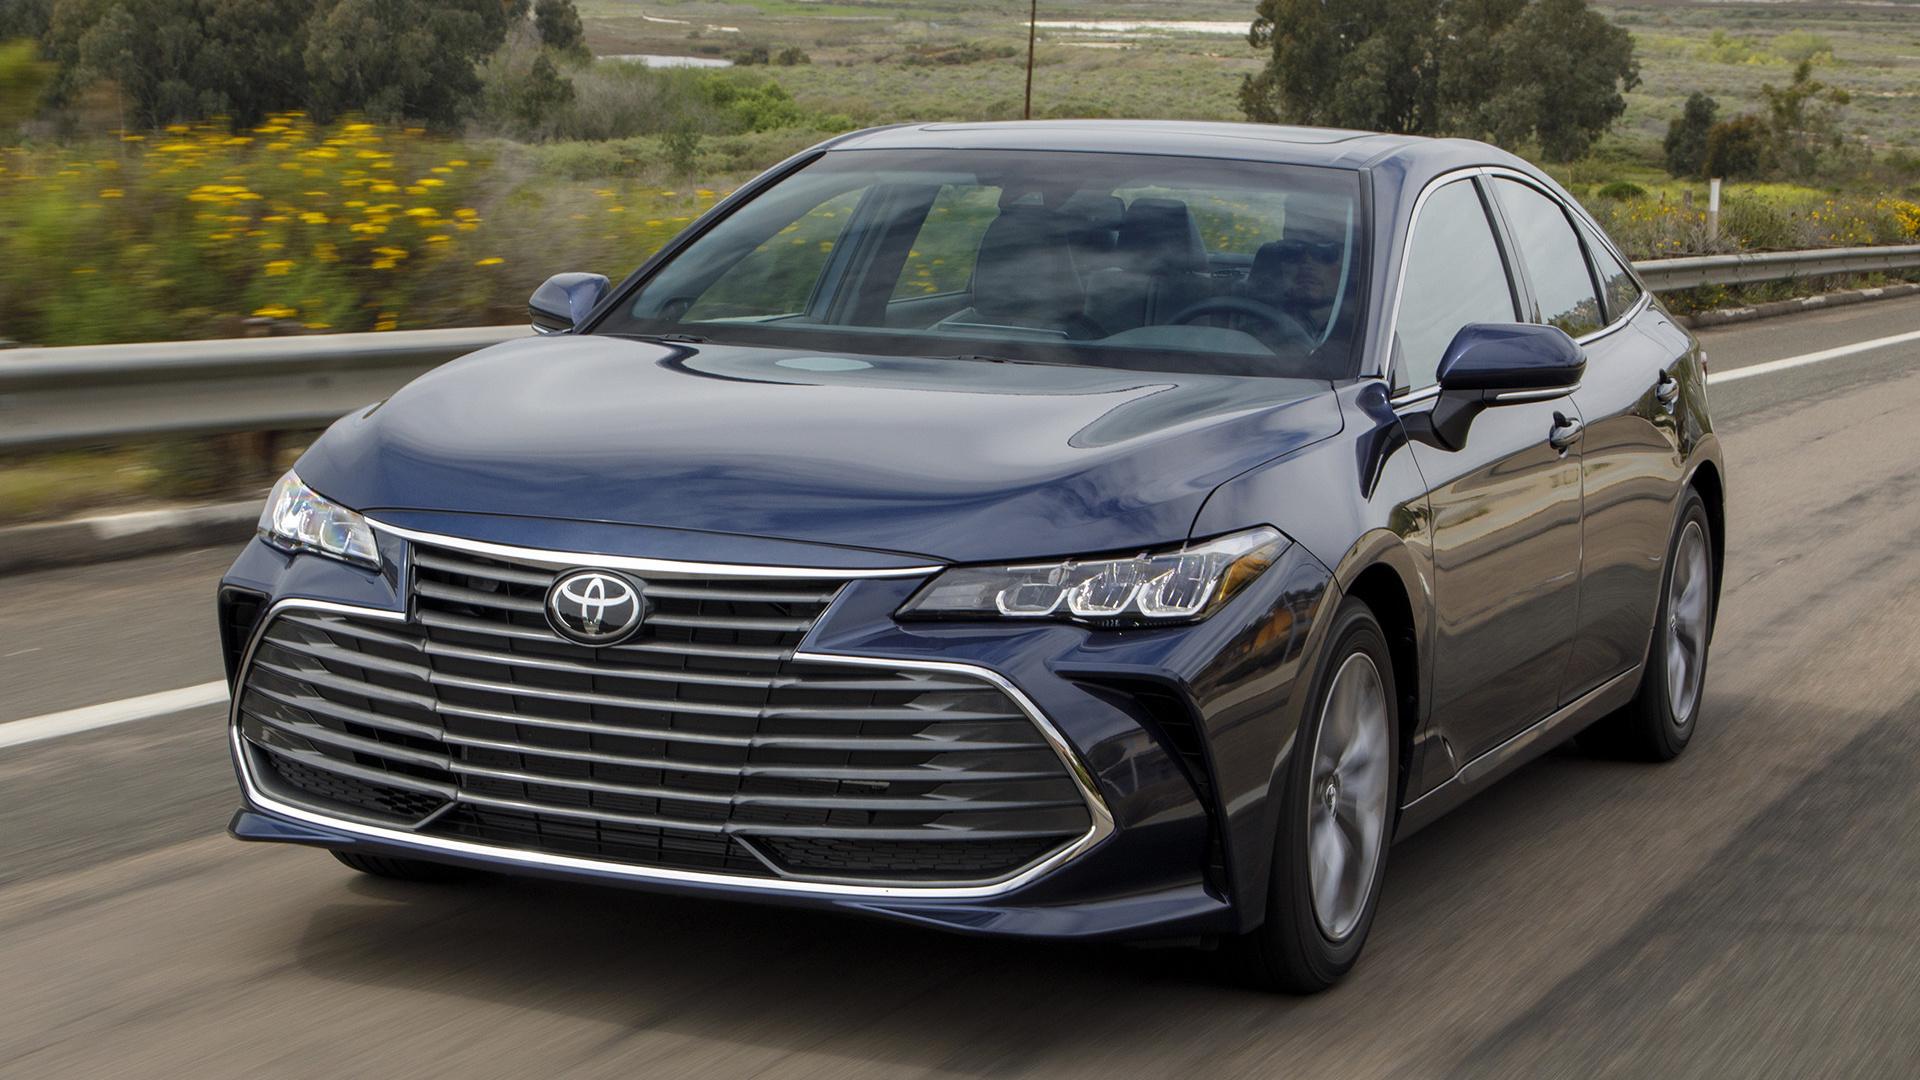 Toyota Avalon and HD Image